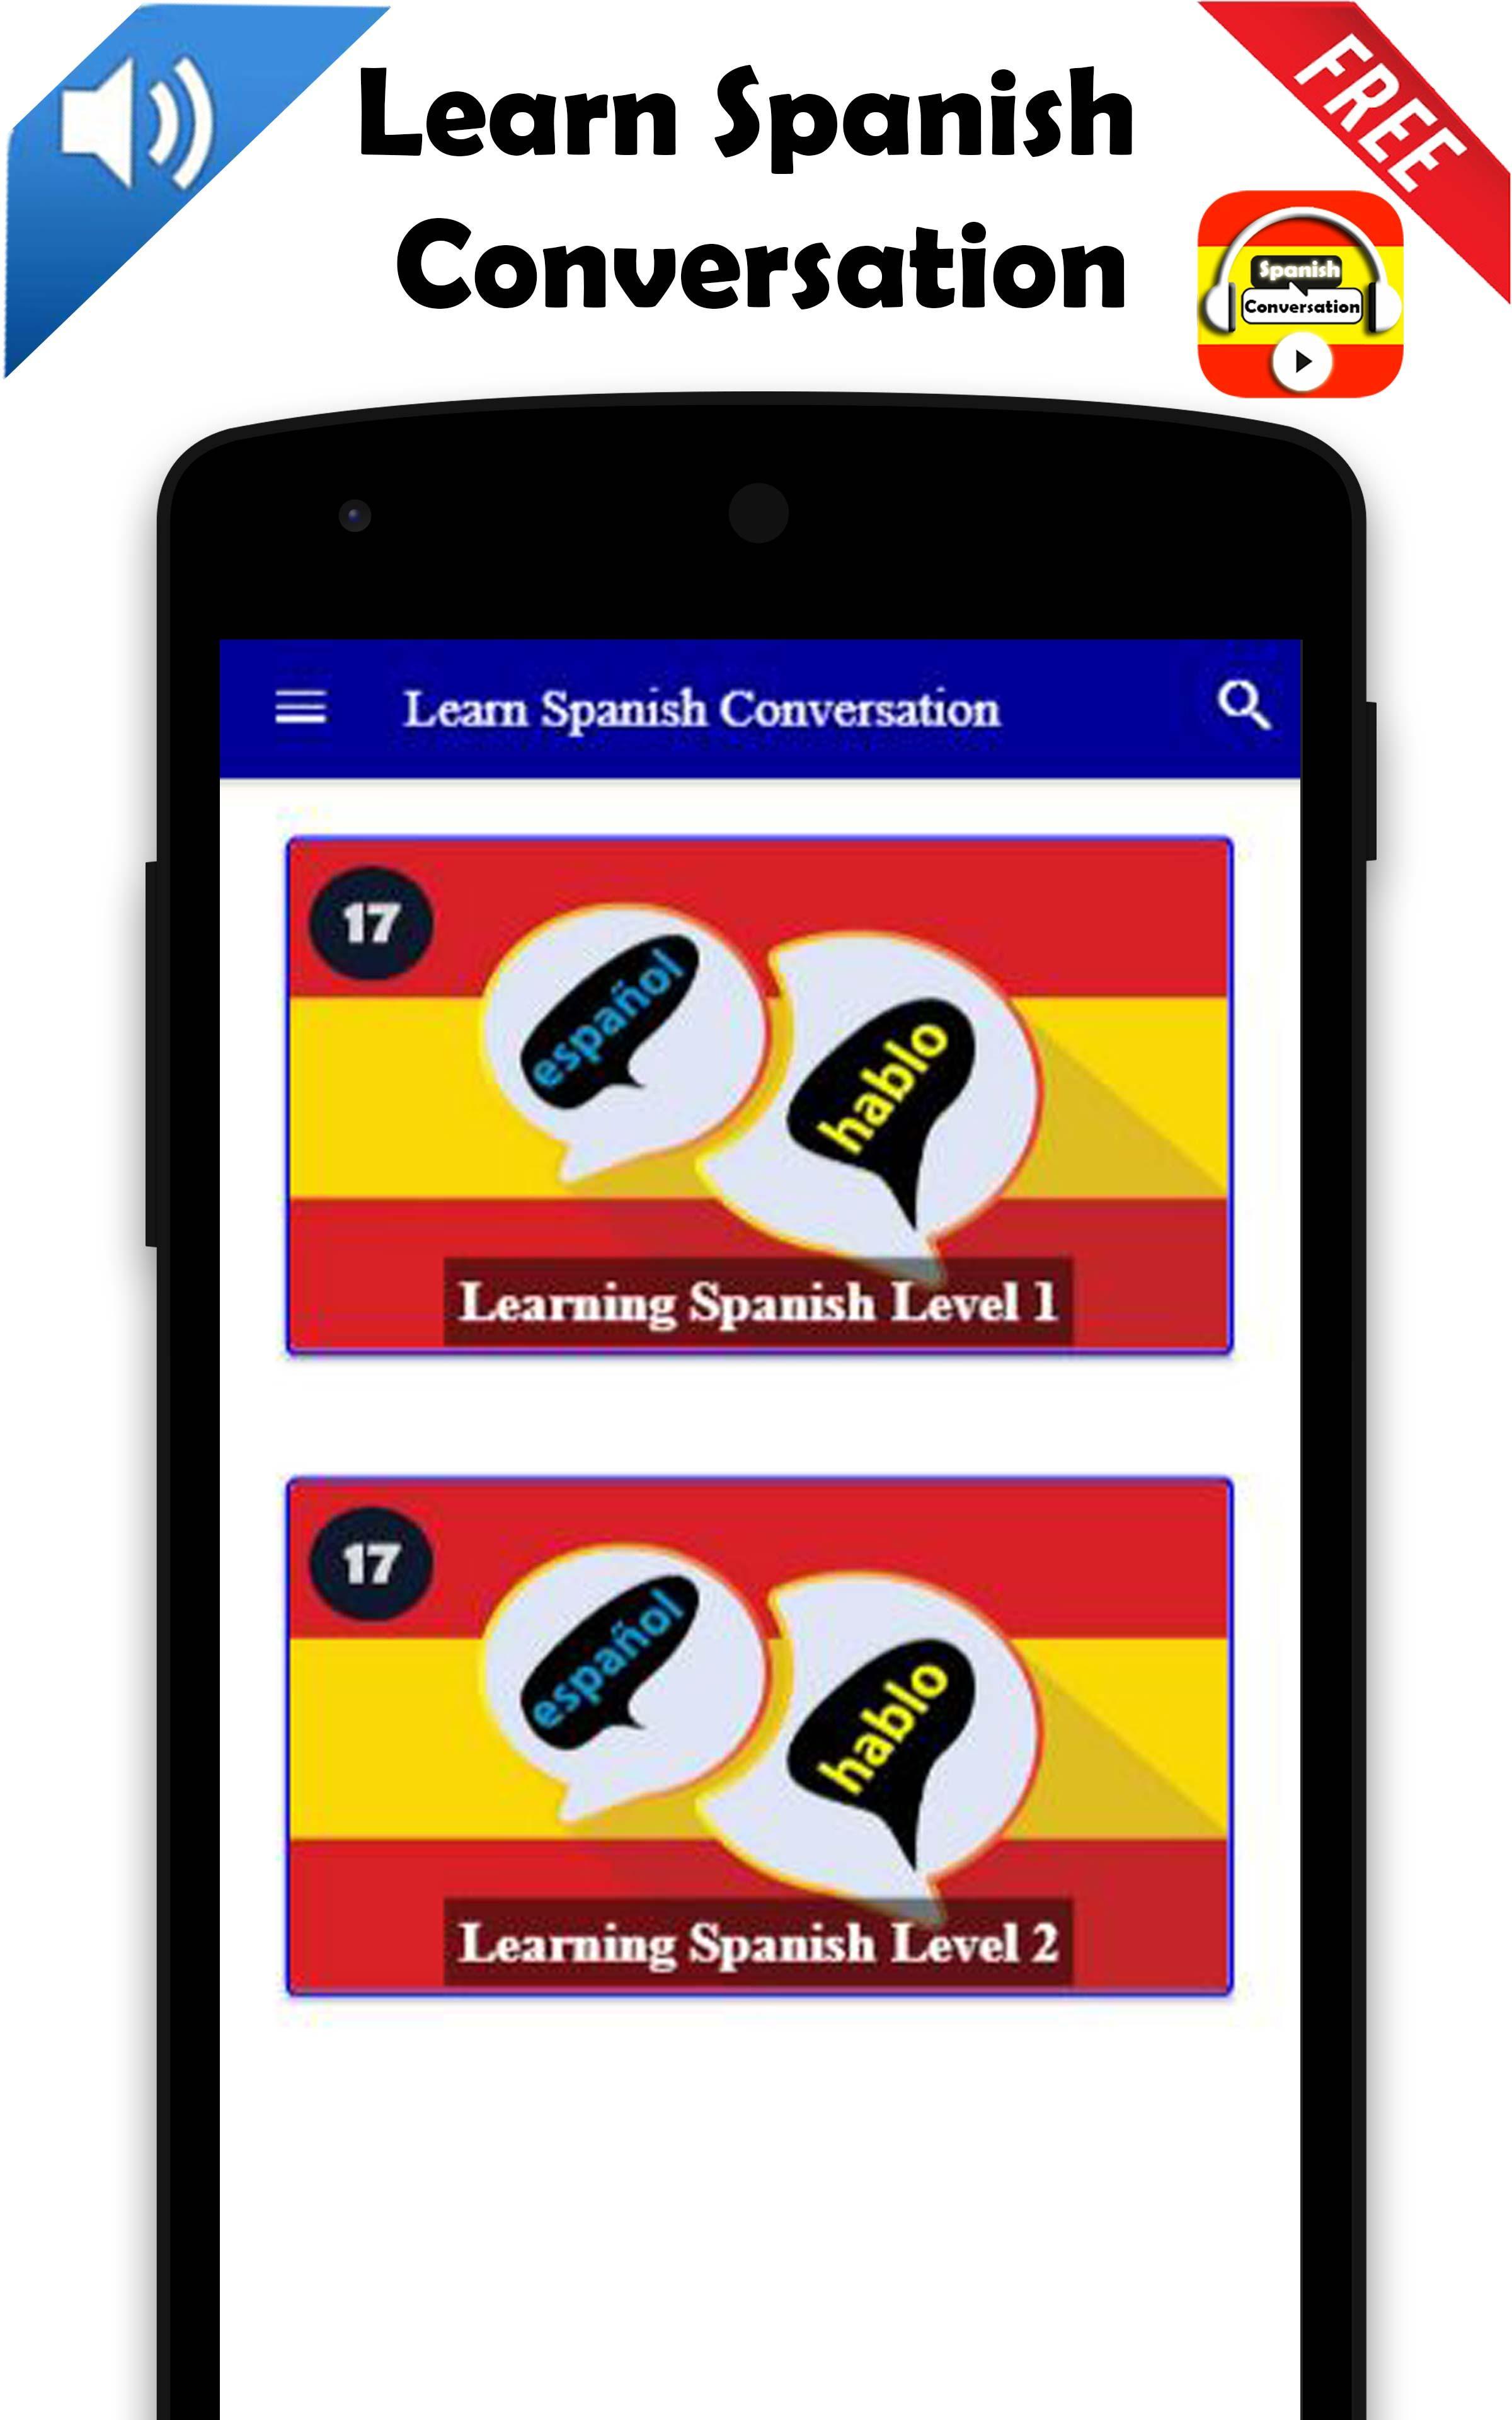 Learn Spanish Conversation for Android - APK Download